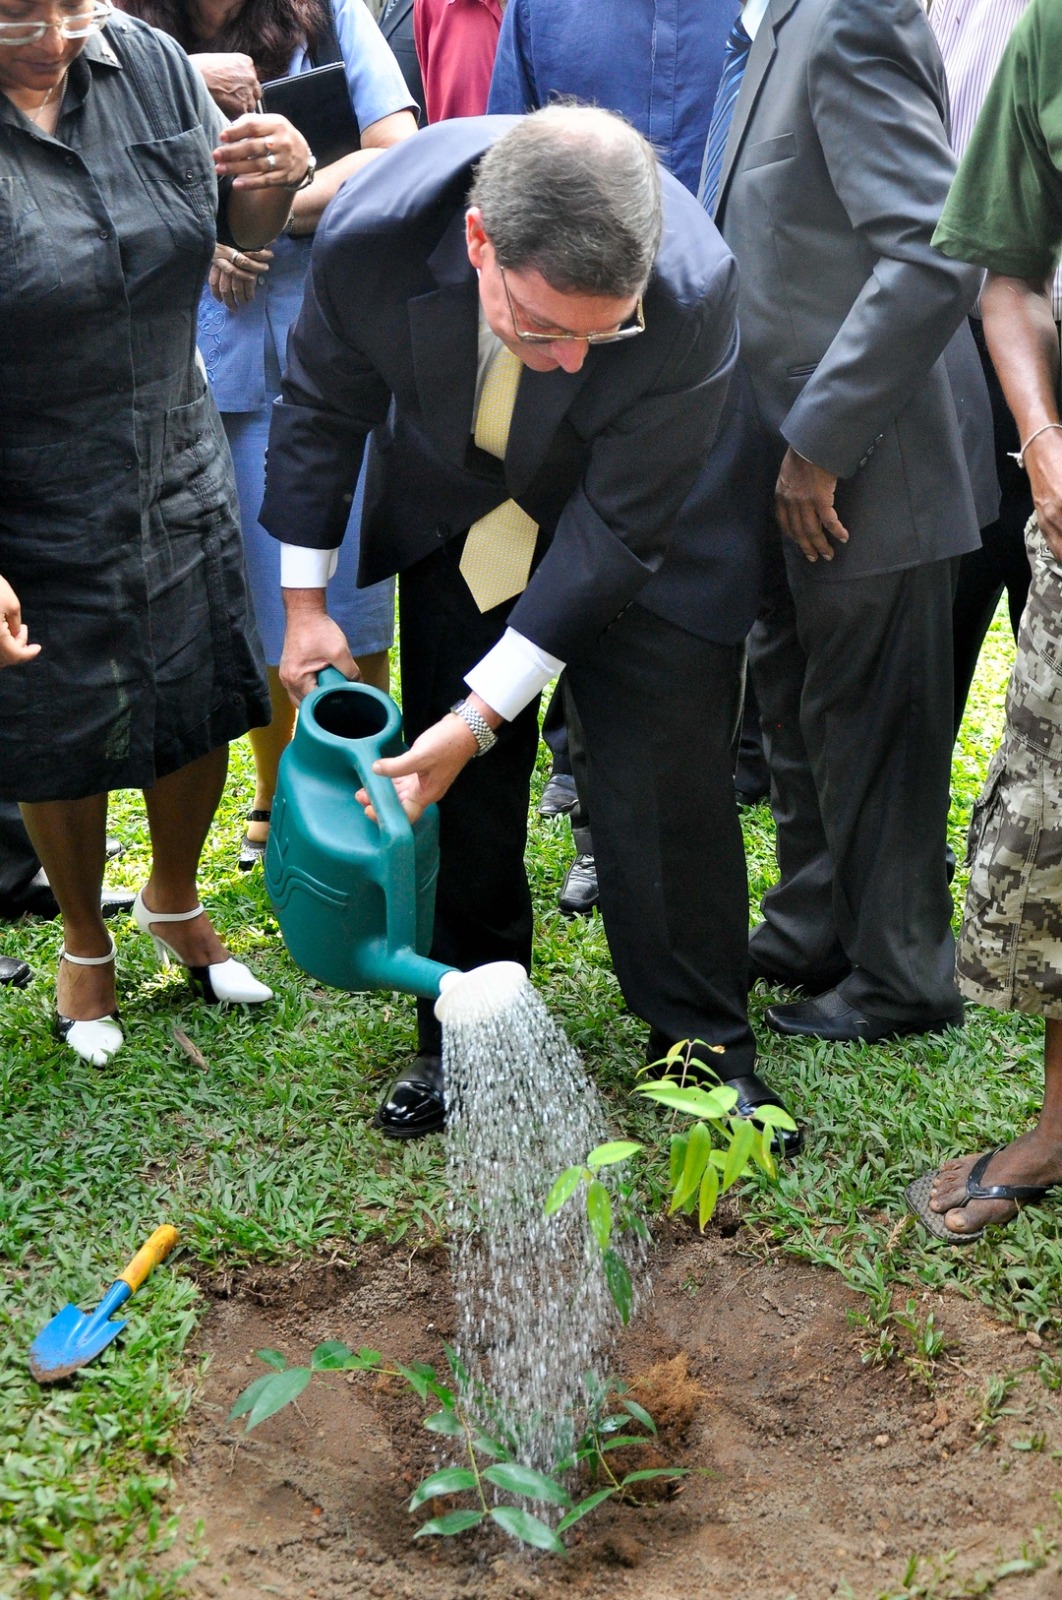 Foreign Minister of Cuba plants a tree in Colombo, Sri Lanka.